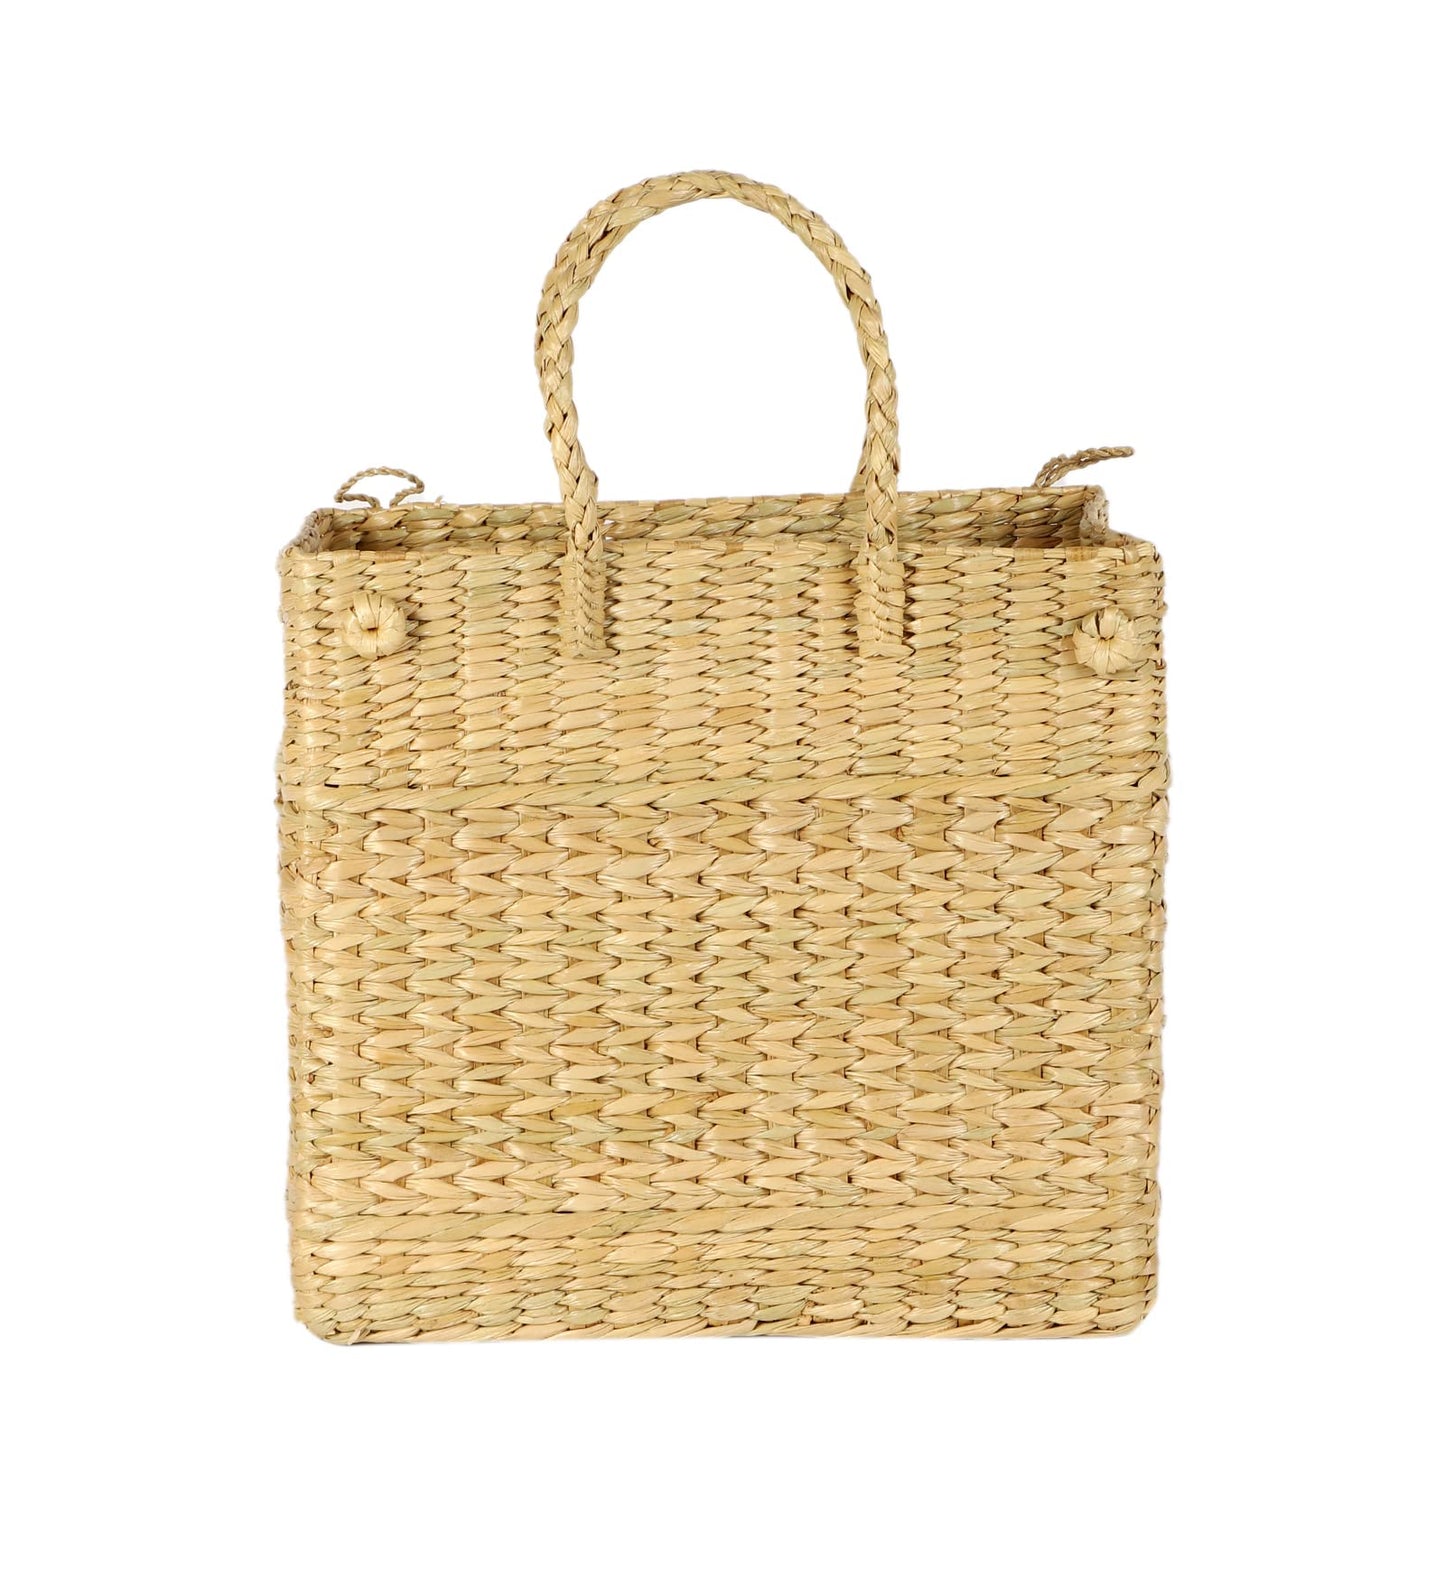 AKWAY Water Reed/Seagrass Storage Basket Picnic Bag - Dry Grass Natural Cane Lunch Bag with Handle, Water Hyacinth Tote for Fruits & Vegetables - Natural Color (Medium) - Akway